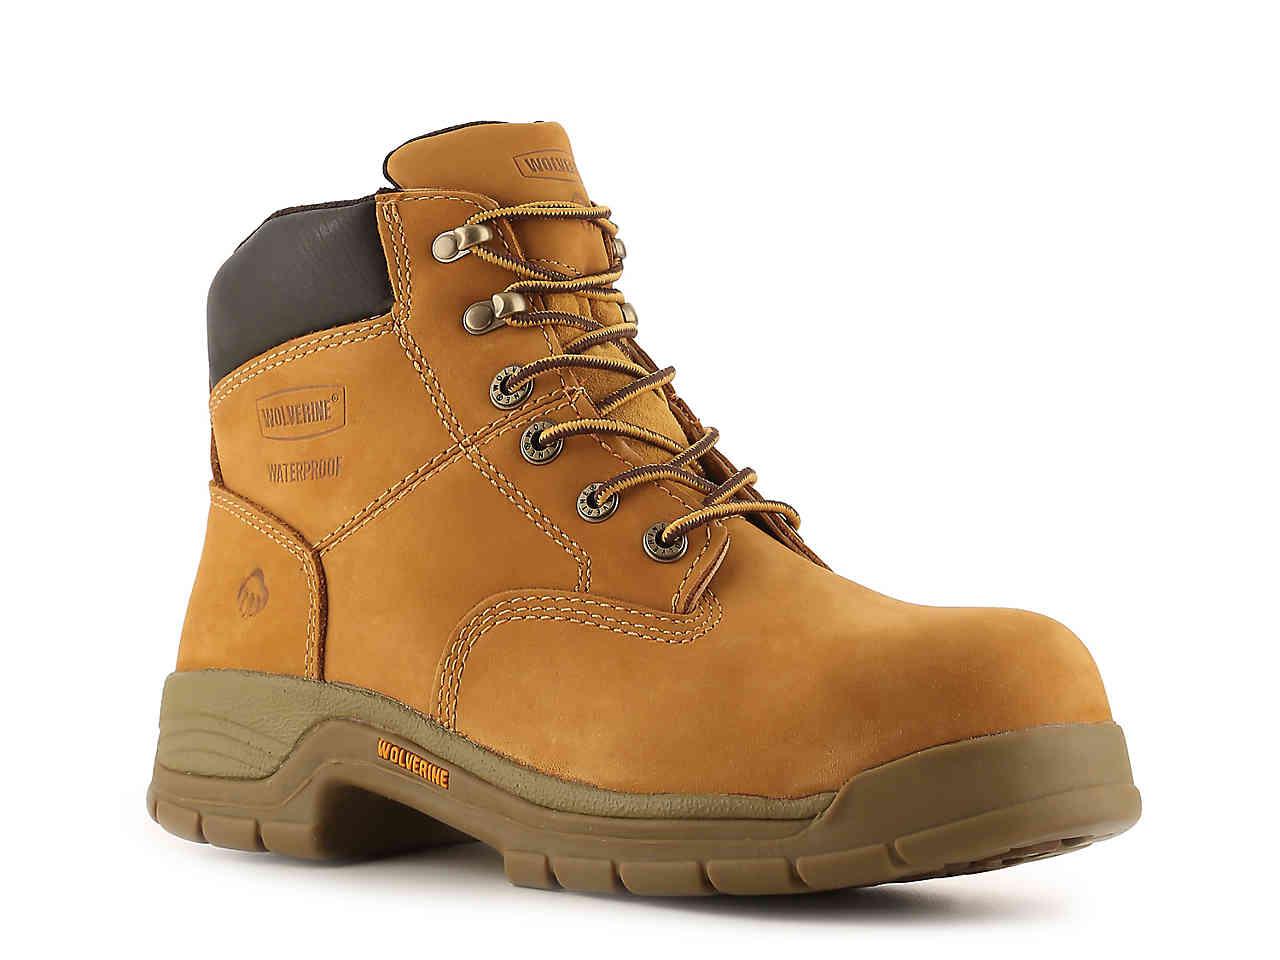 Wolverine Synthetic 5065 Steel Toe Work Boot in Yellow for Men - Lyst